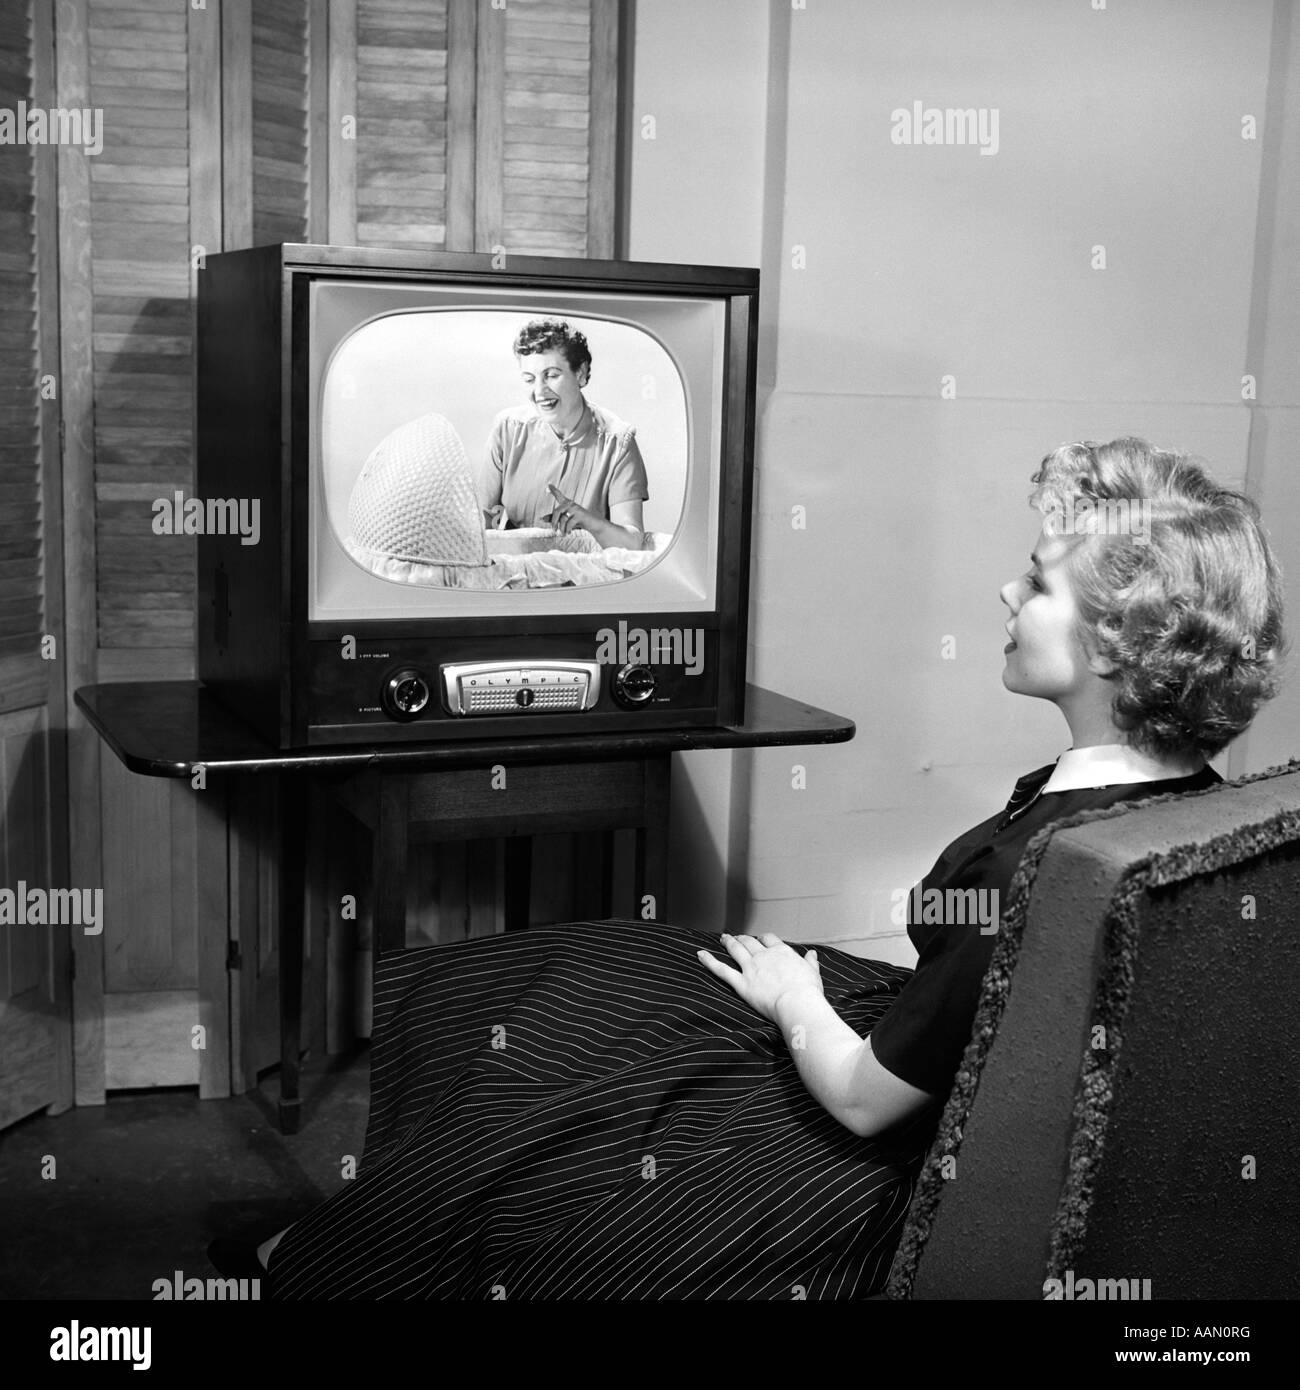 1950s TEEN SITTING WITH BACK TO VIEWER WATCHING A WOMAN LOOKING INTO A BASSINET ON HER TELEVISION IN A DARK ROOM Stock Photo